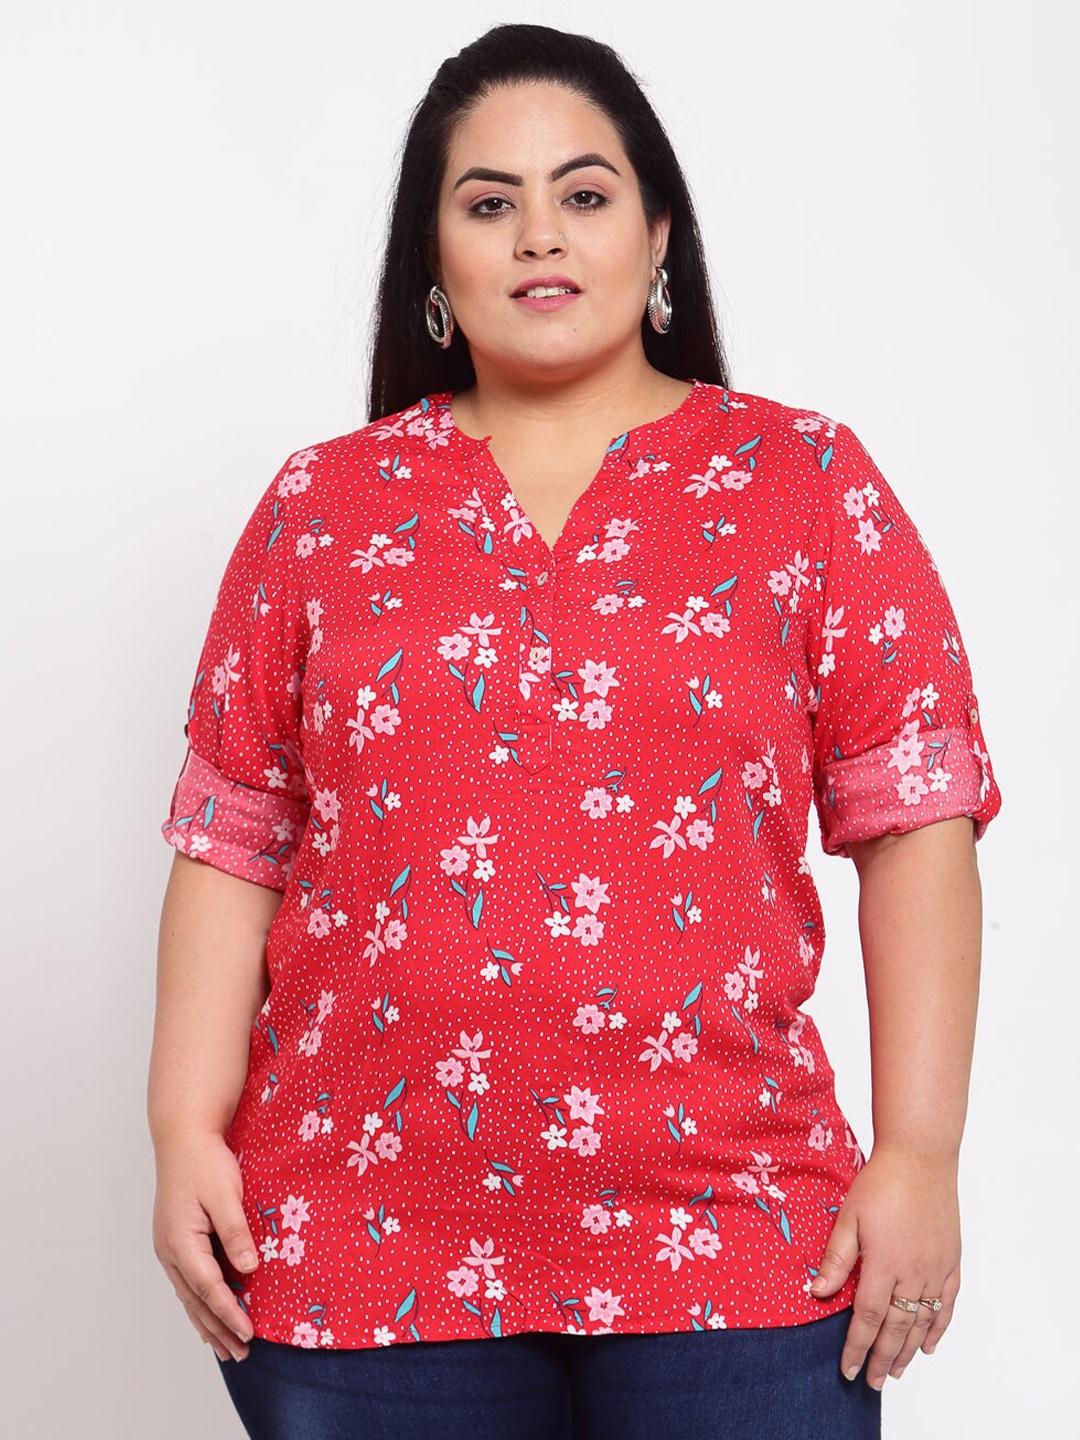 pluss-red-floral-shirt-style-top